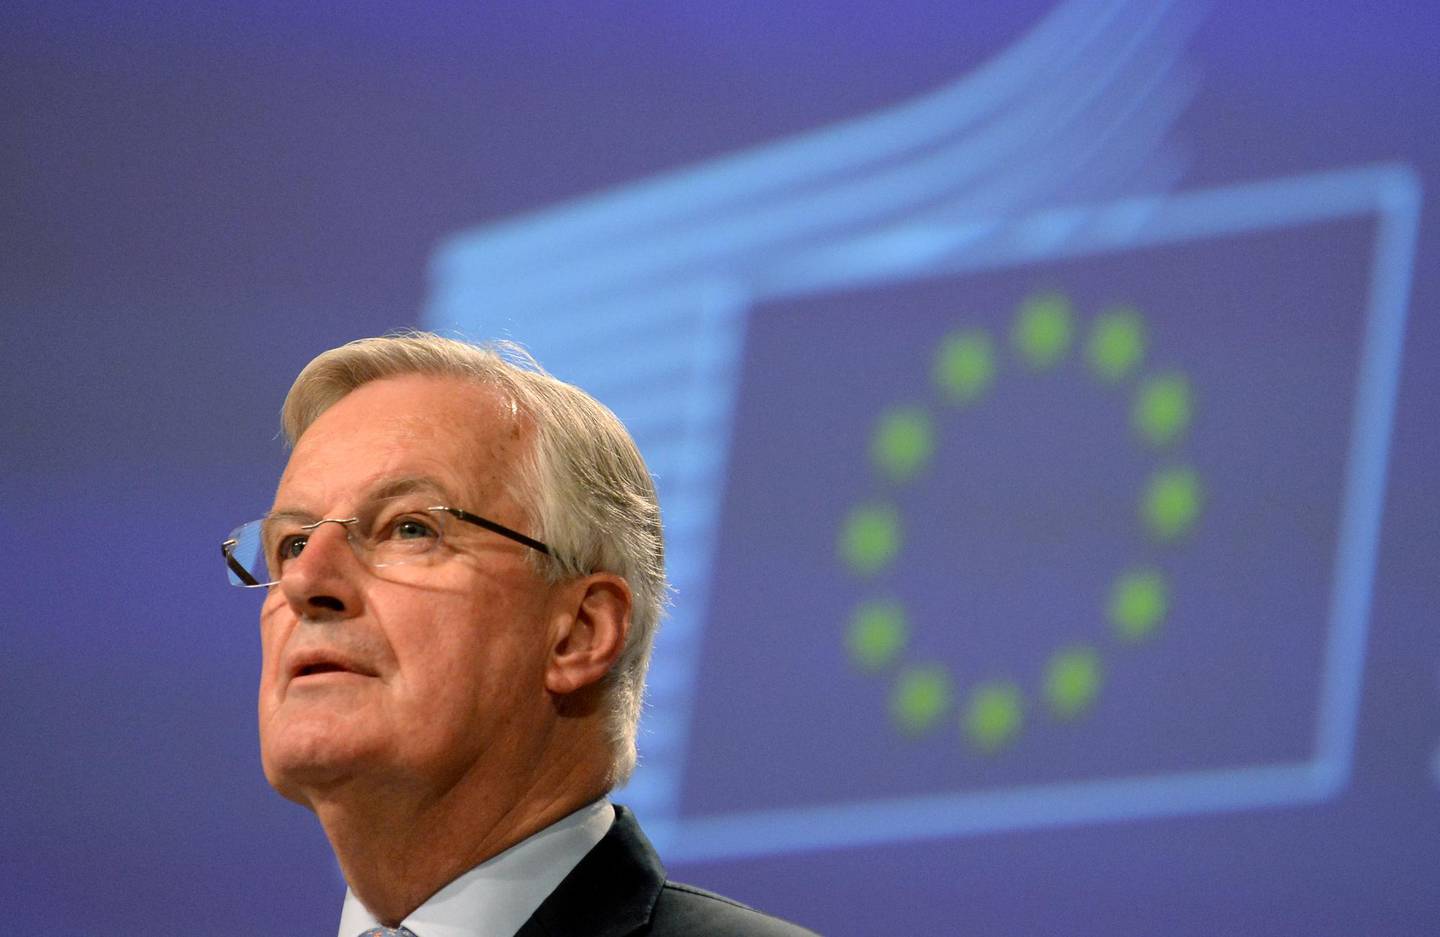 FILE PHOTO: Michel Barnier, Brexit chief negotiator for Europe on future ties with Britain, gives a news conference after the first week of EU-UK negotiations, in Brussels, Belgium, March 5, 2020. REUTERS/Johanna Geron/File Photo